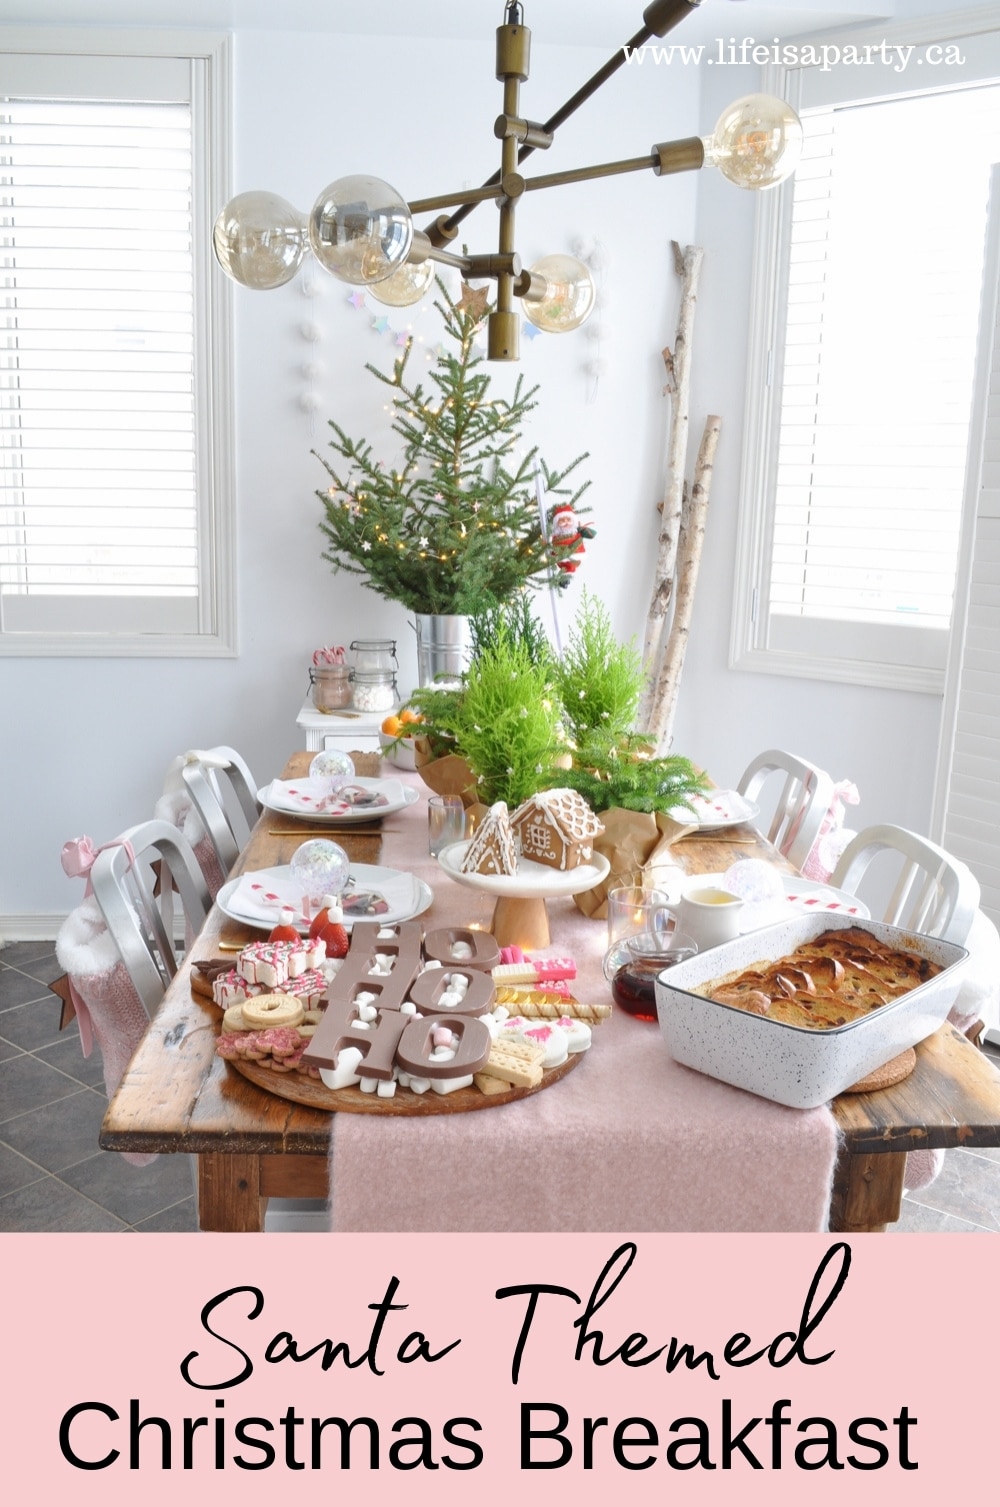 Santa Themed Christmas Breakfast Ideas: a beautiful pink tablescape, with stockings hanging on the chairs, a menu, and matching pjs.